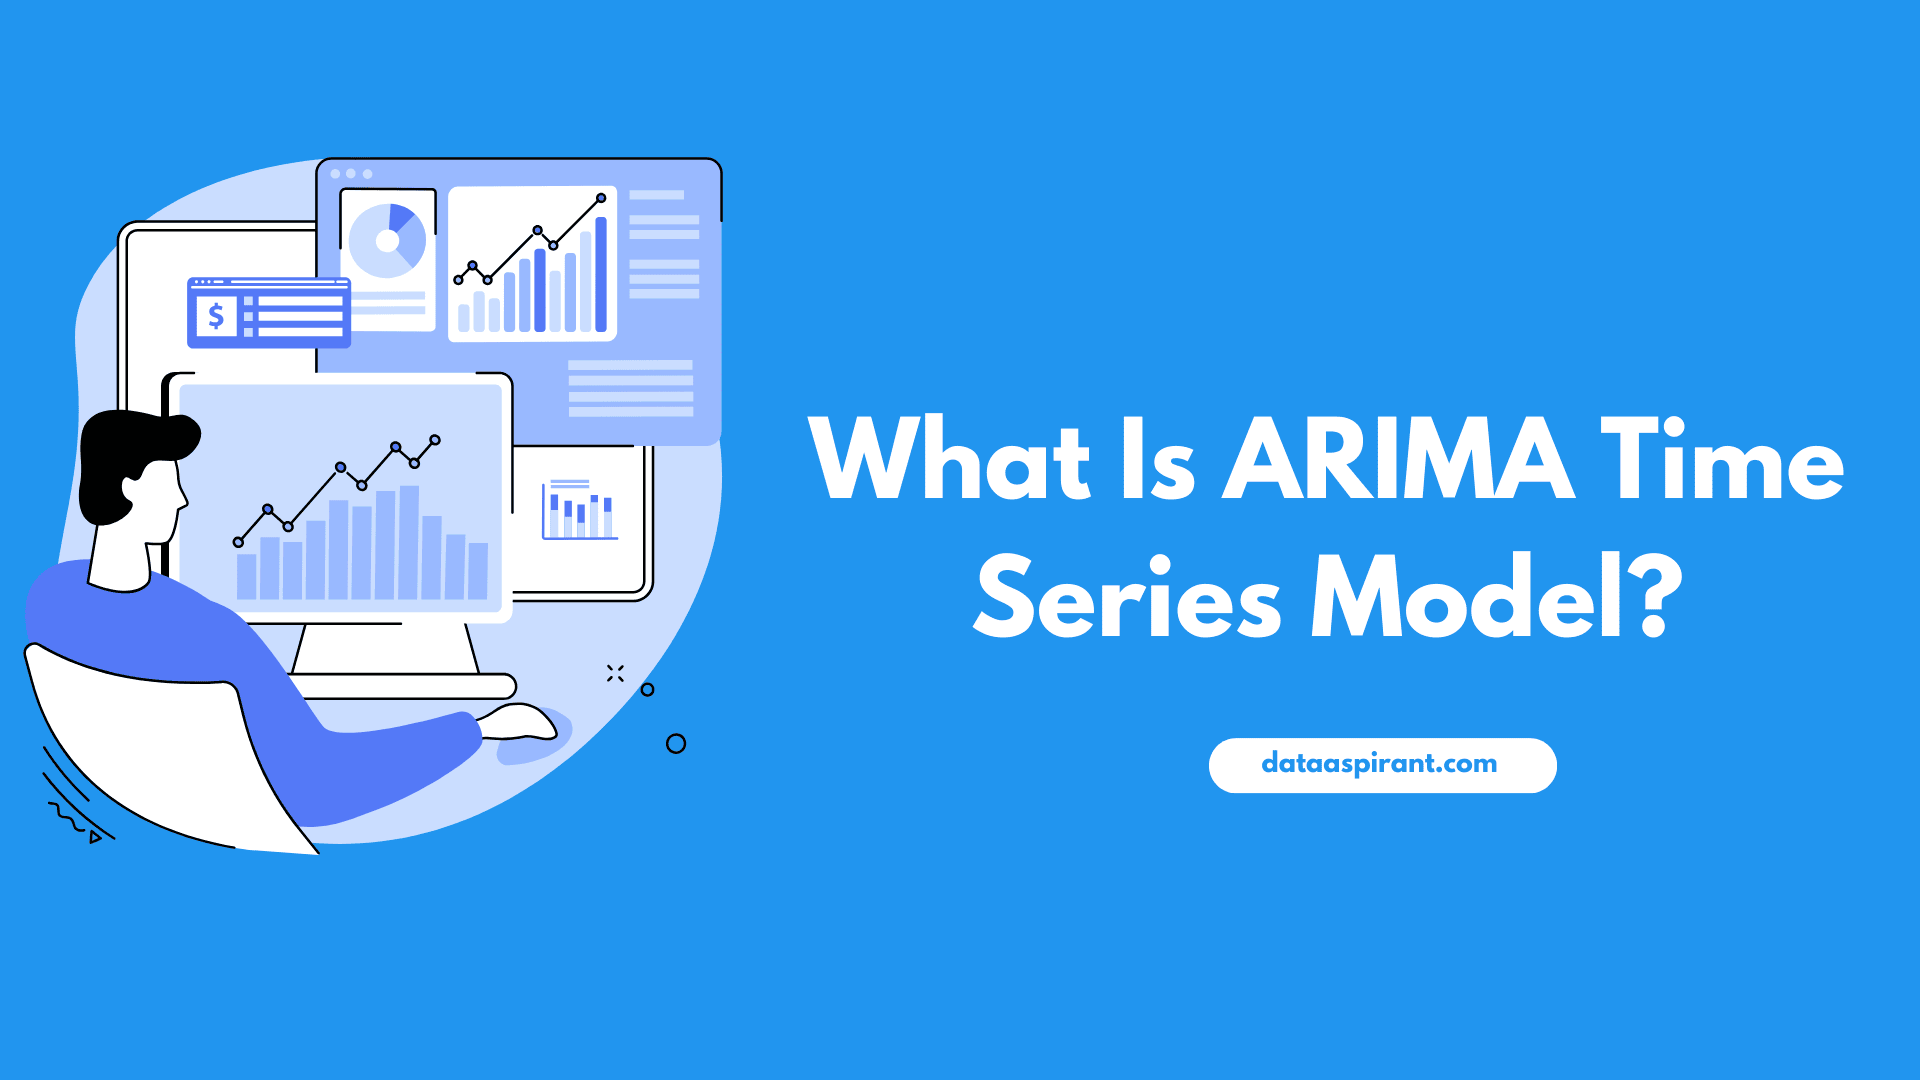 What Is ARIMA Time Series Model?